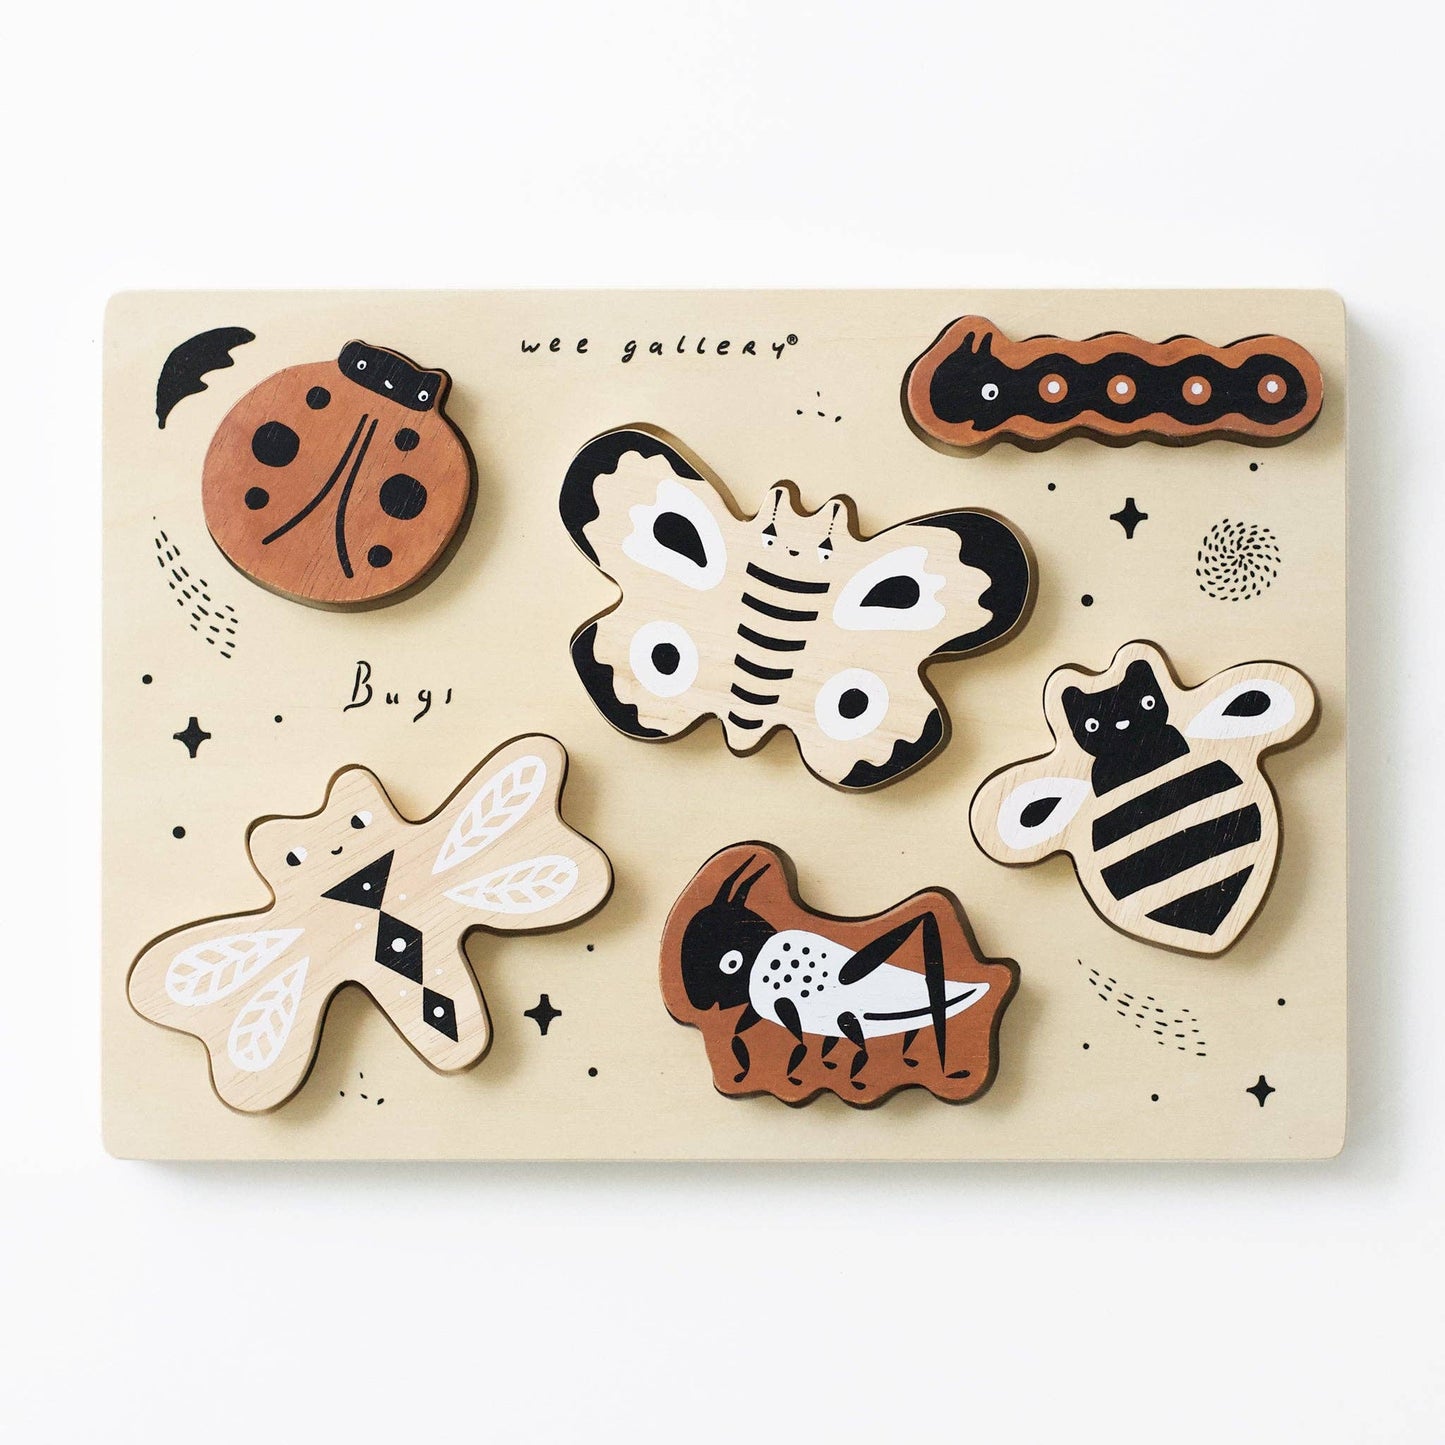 Wee Gallery - Wooden Tray Puzzle - Bugs